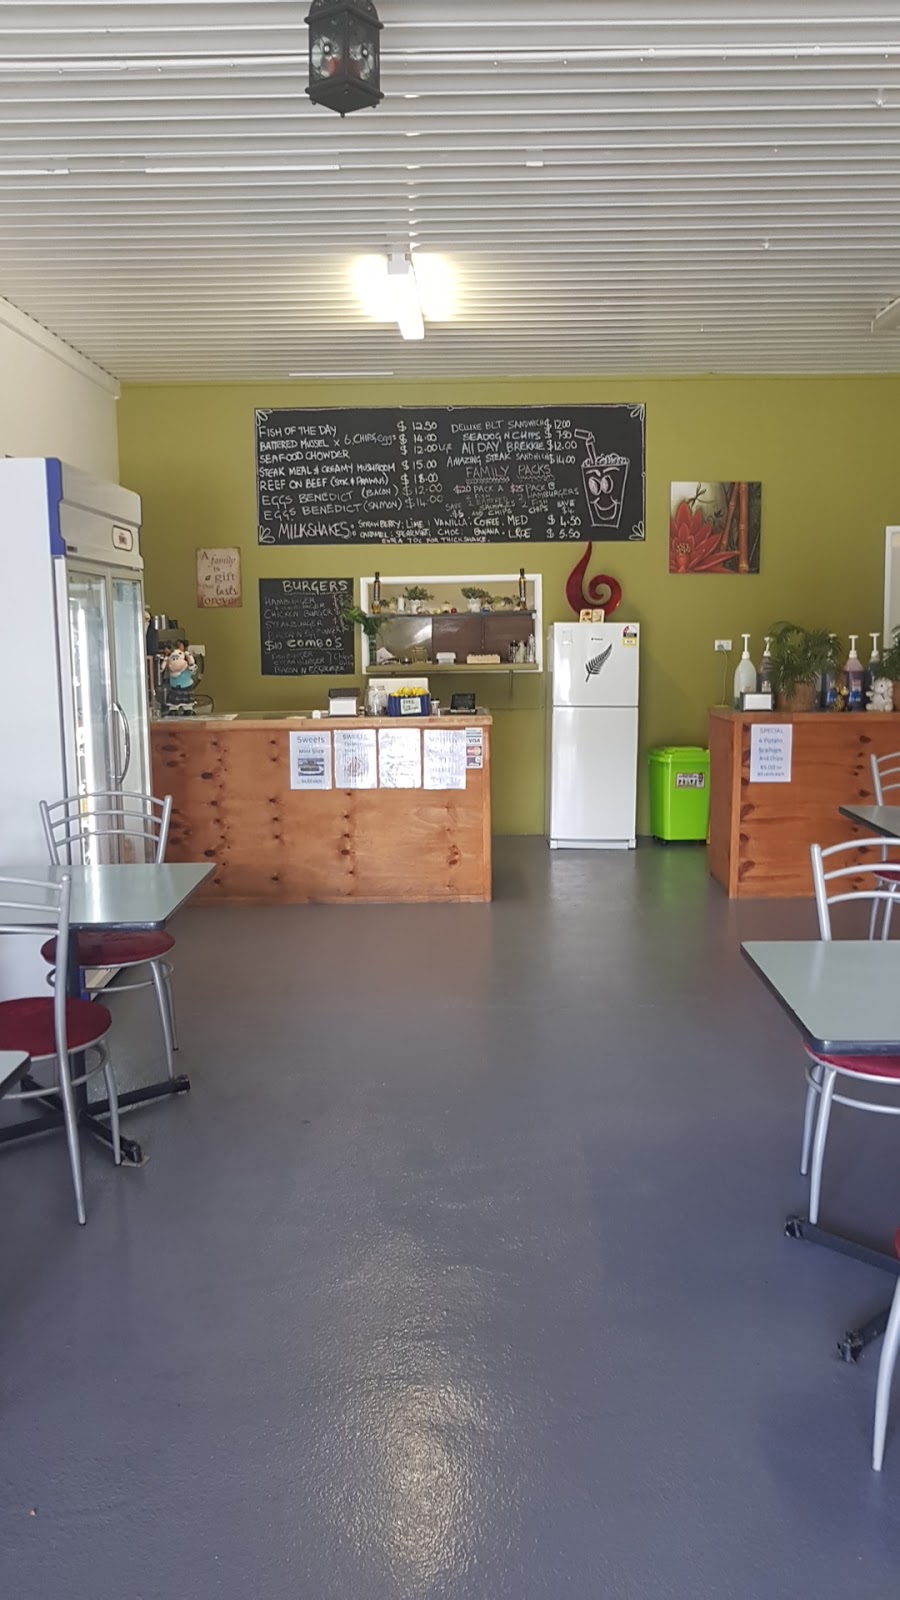 Amazing Grace Cafe | cafe | shop 2/247 Waterford Rd, Ellen Grove QLD 4078, Australia | 0423594838 OR +61 423 594 838